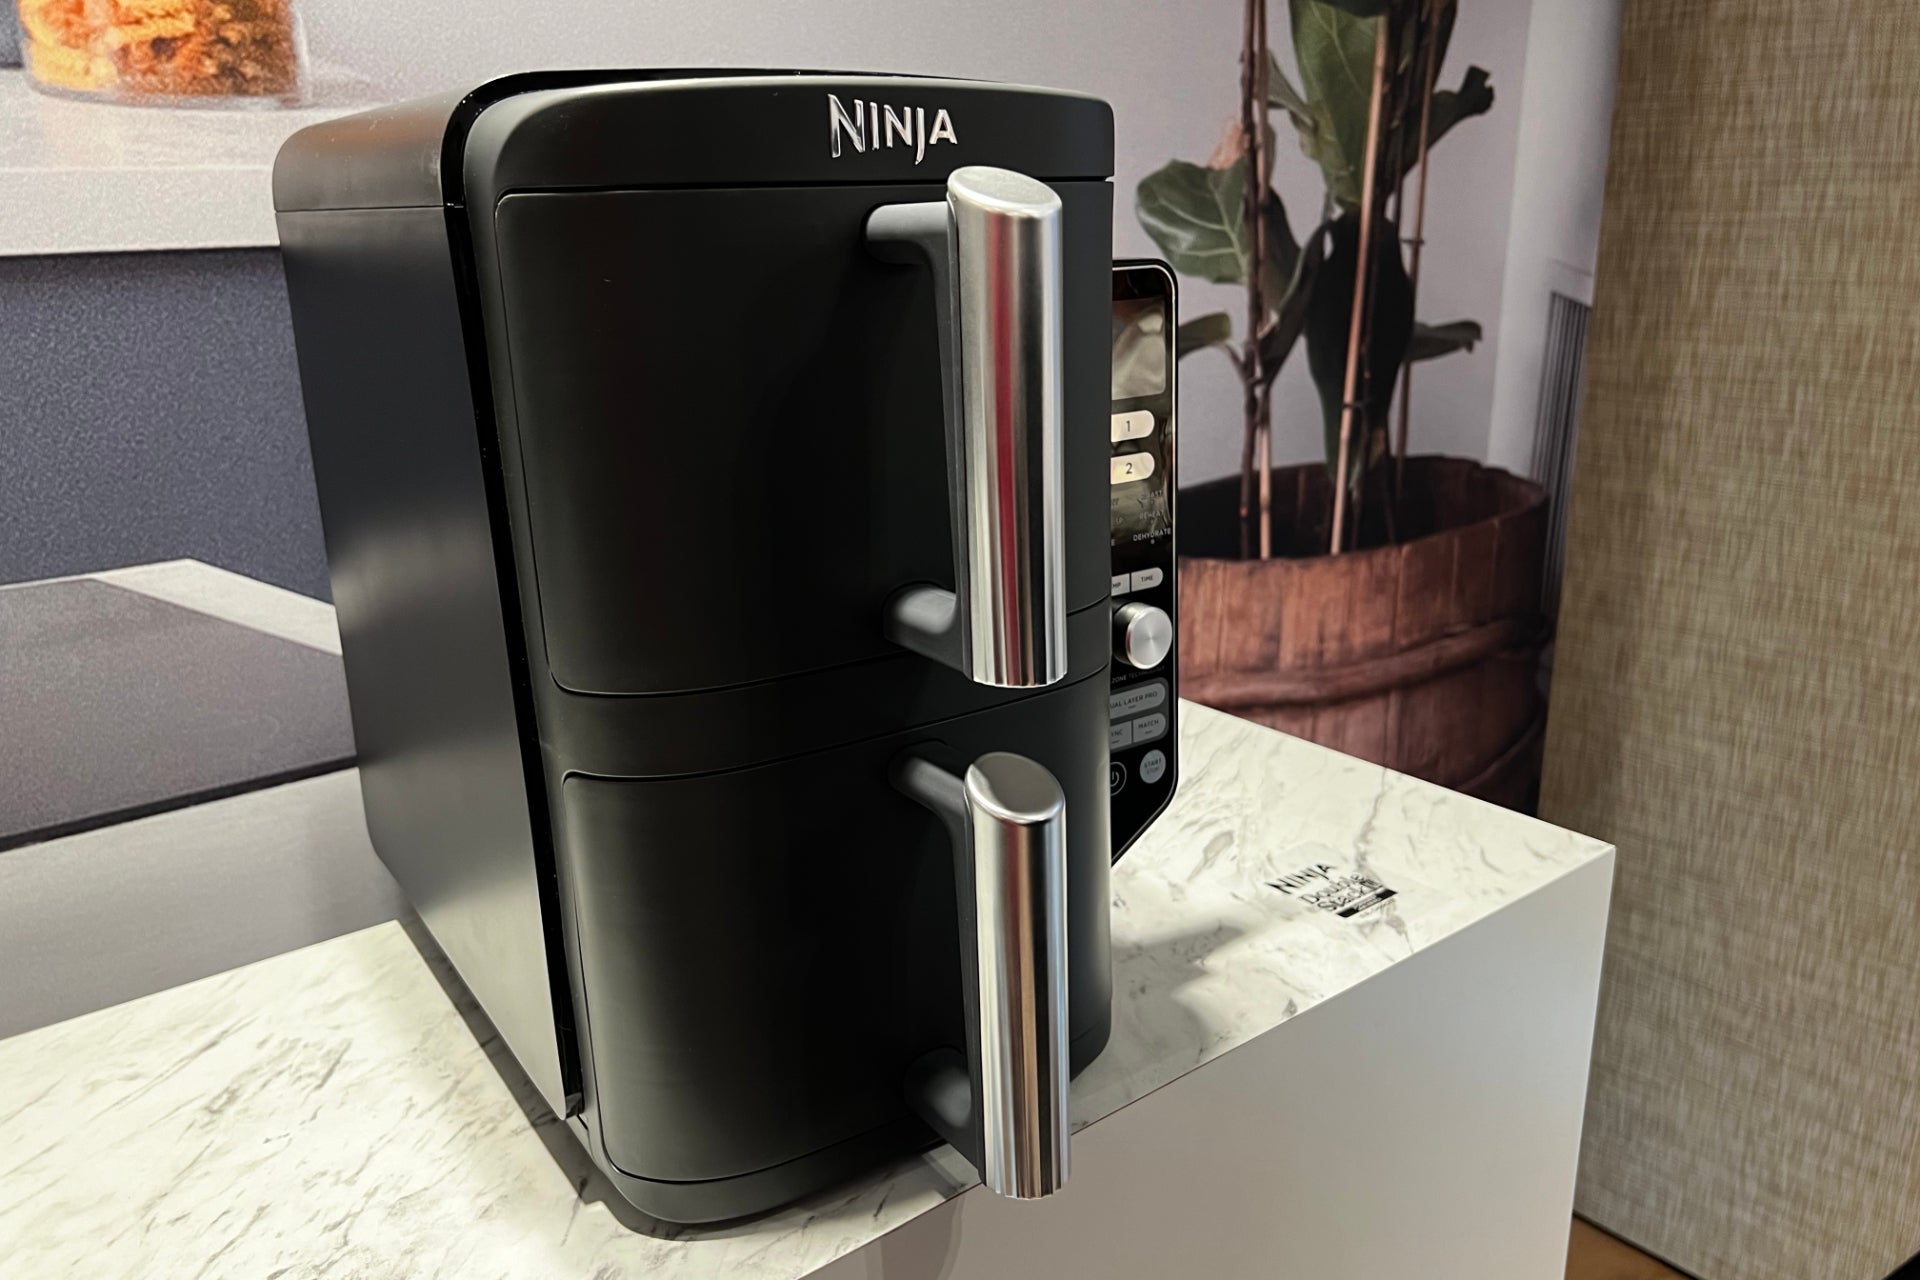 Ninja Double Stack Air Fryer gives two drawers in less space